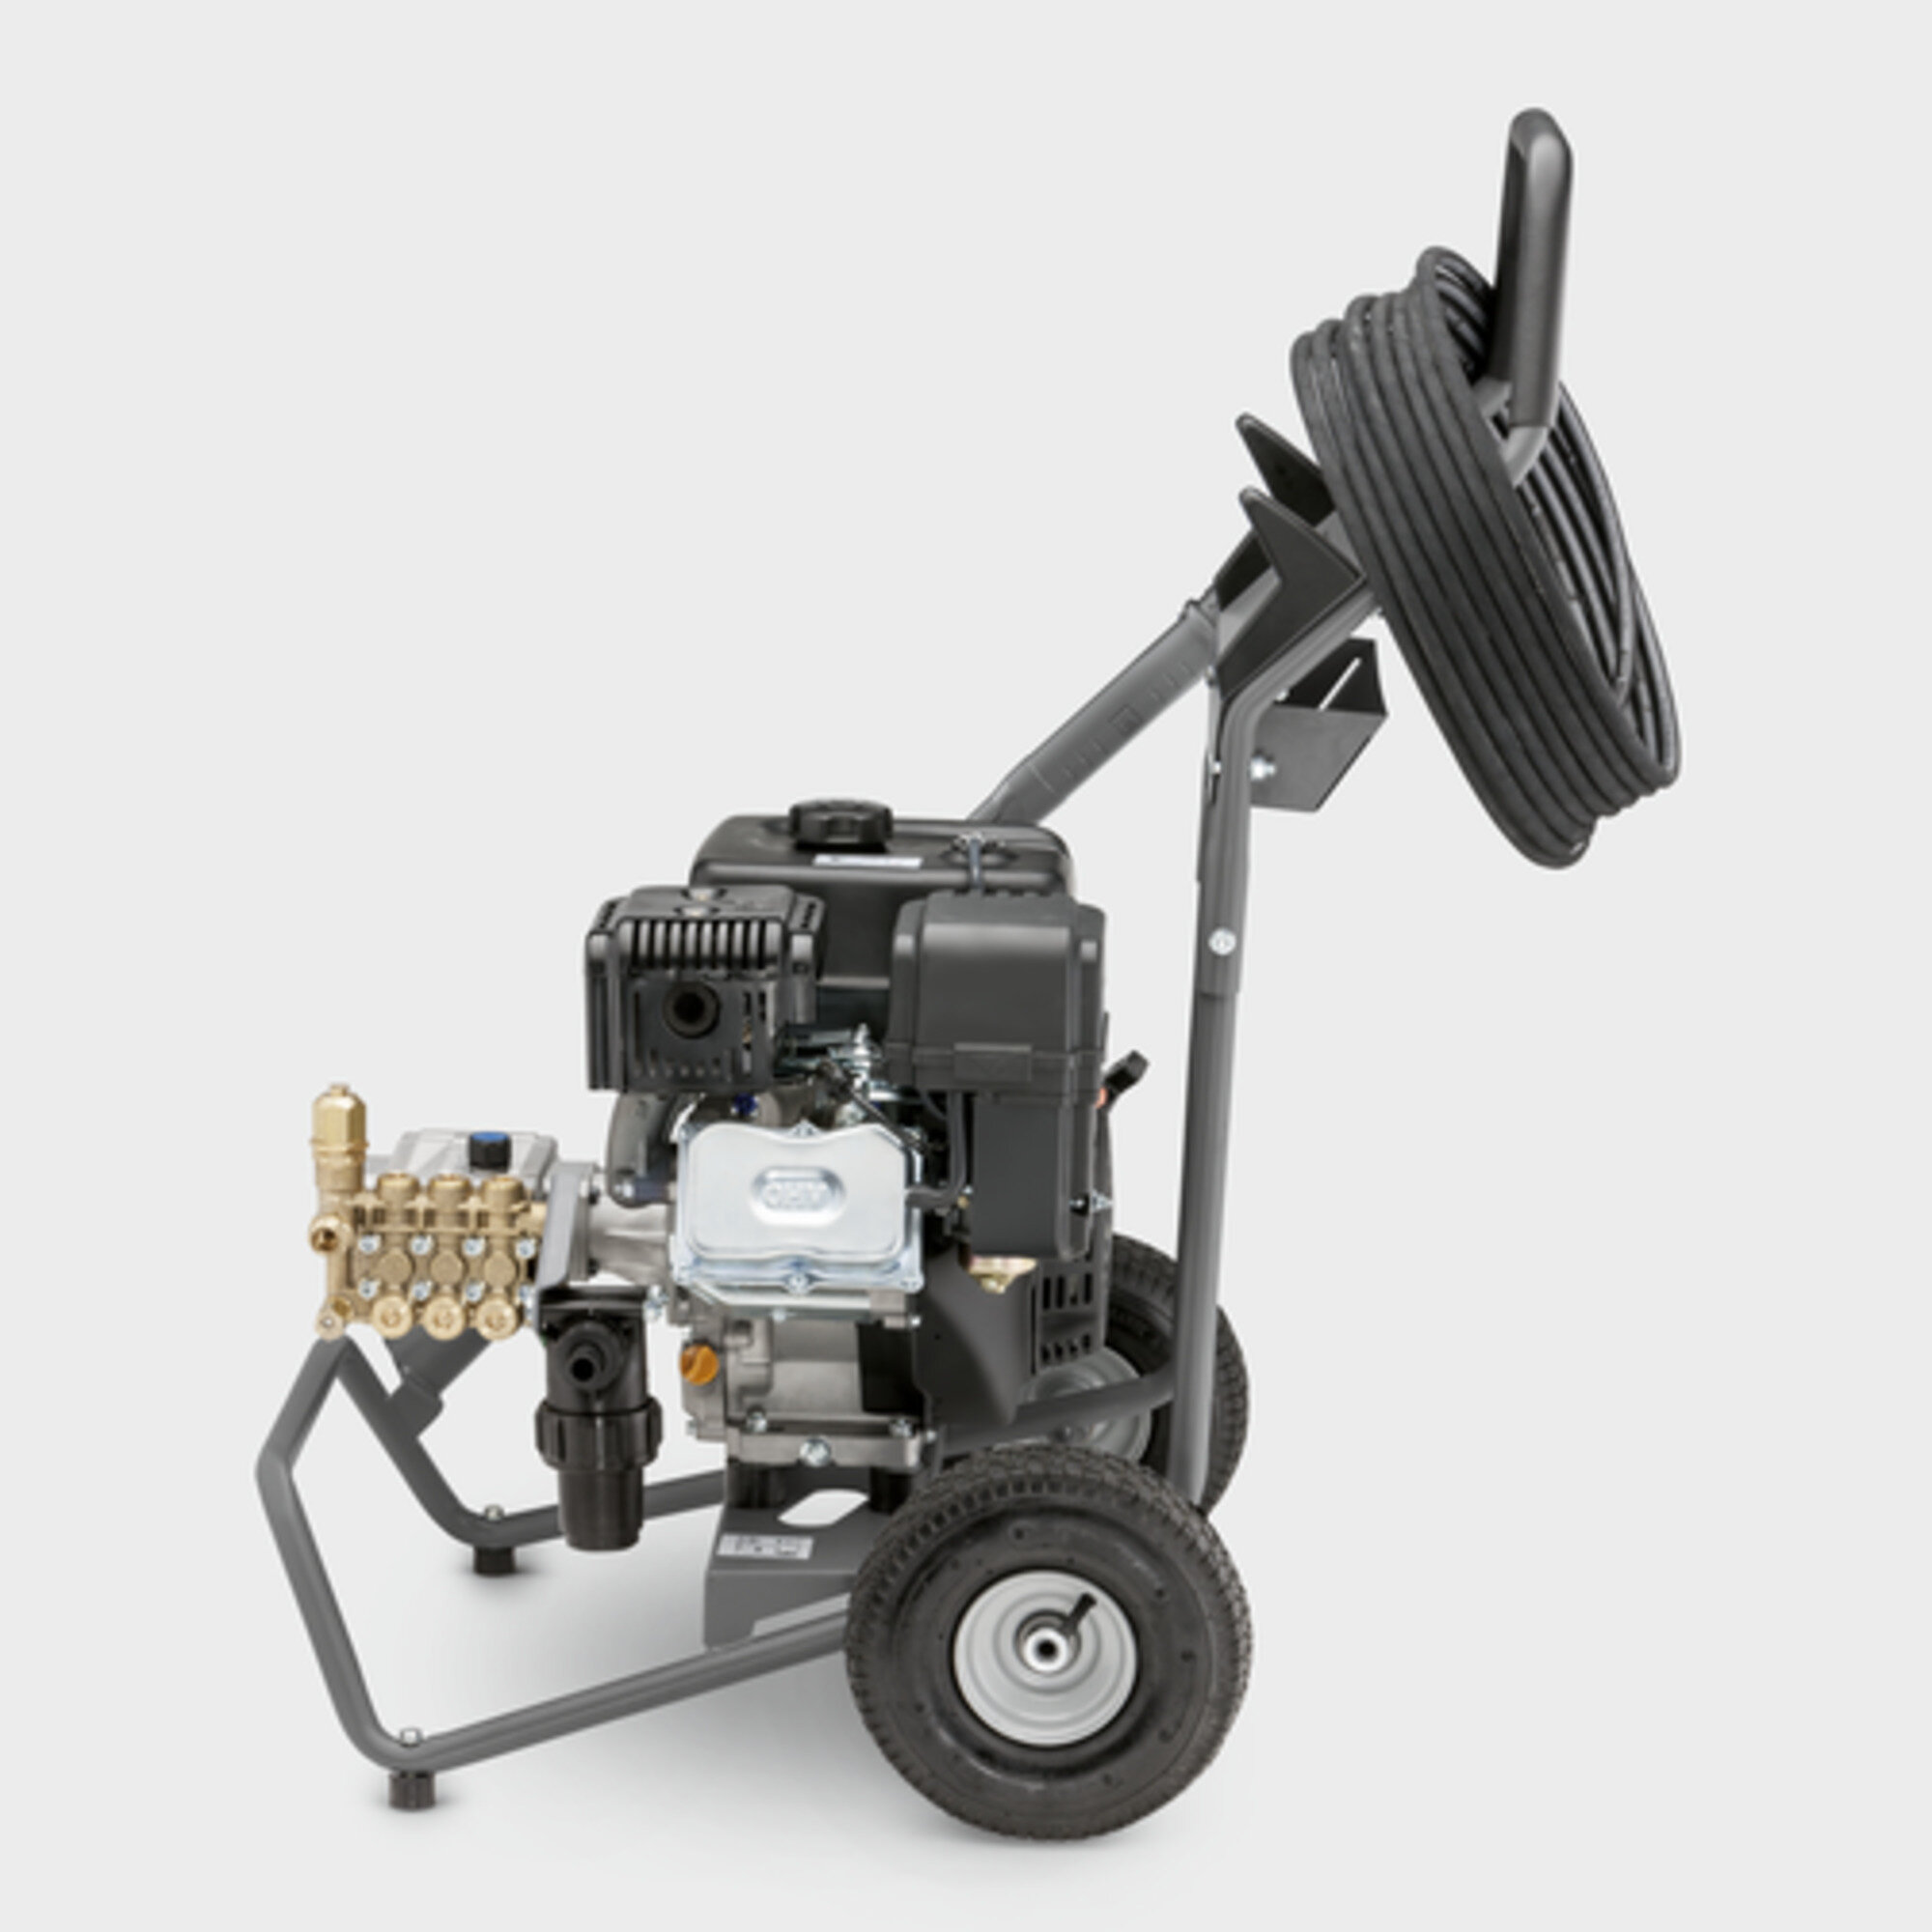 High pressure washer HD 8/23 G Classic: Outstanding mobility